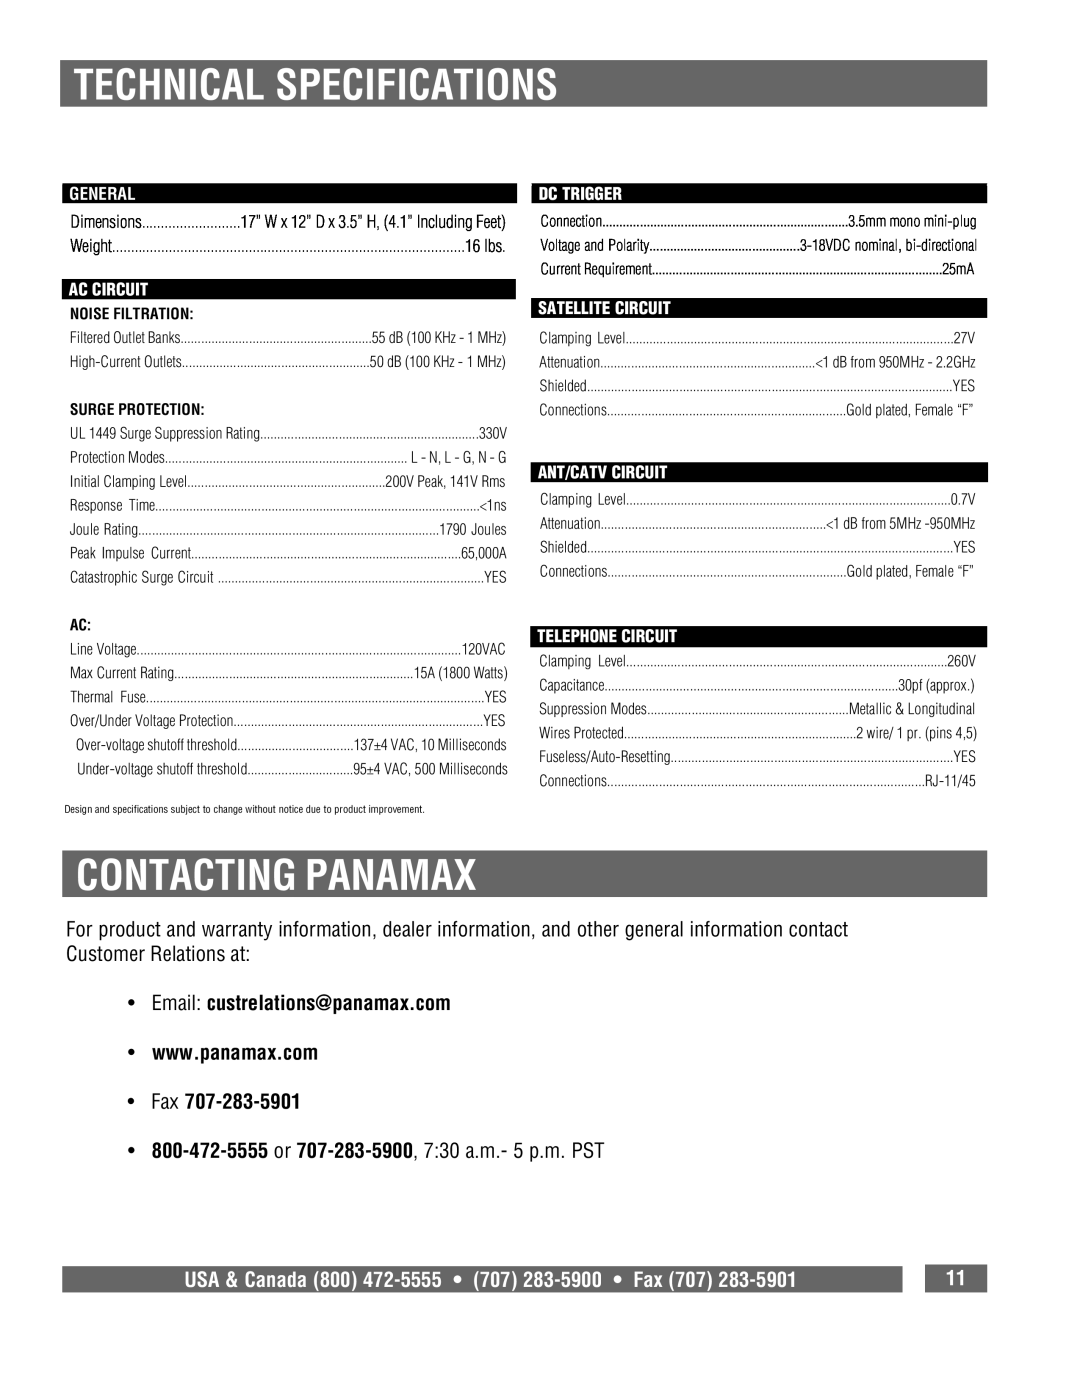 Panamax 5300 owner manual Technical Specifications, Contacting Panamax, USA & Canada 800 472-5555 707 283-5900 Fax 